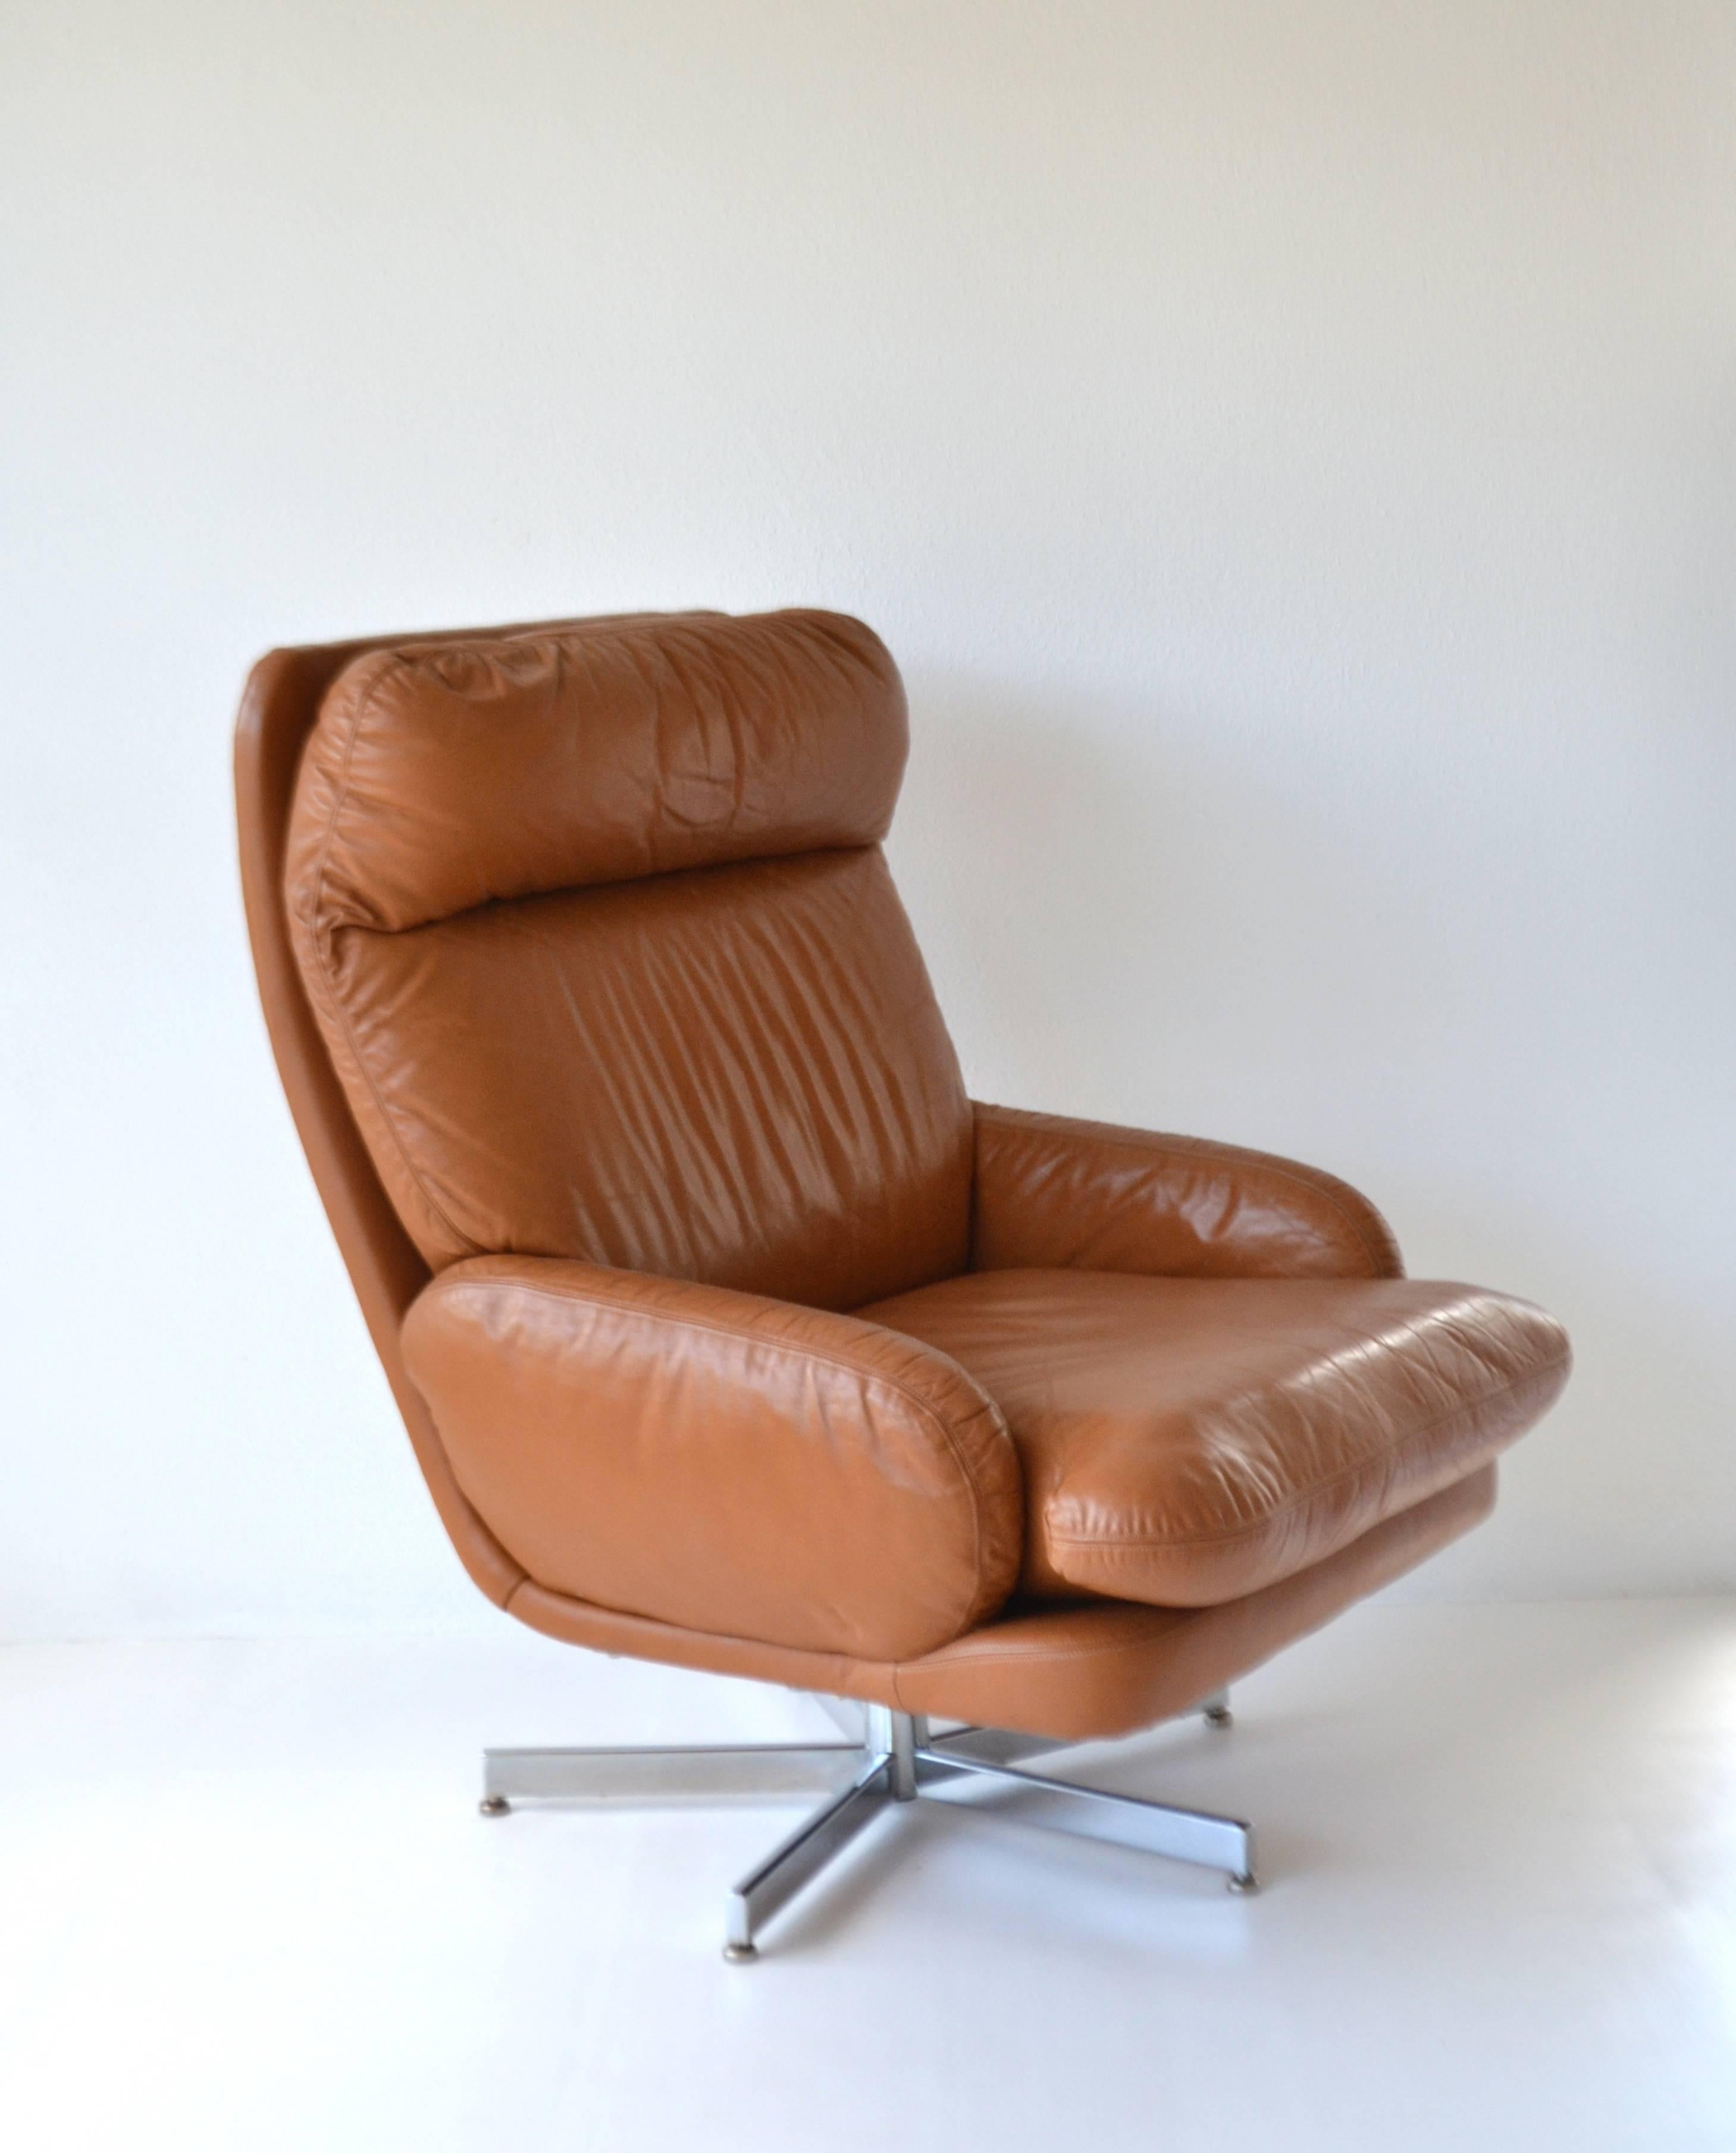 Midcentury Leather Lounge Chair and Ottoman In Excellent Condition For Sale In West Palm Beach, FL